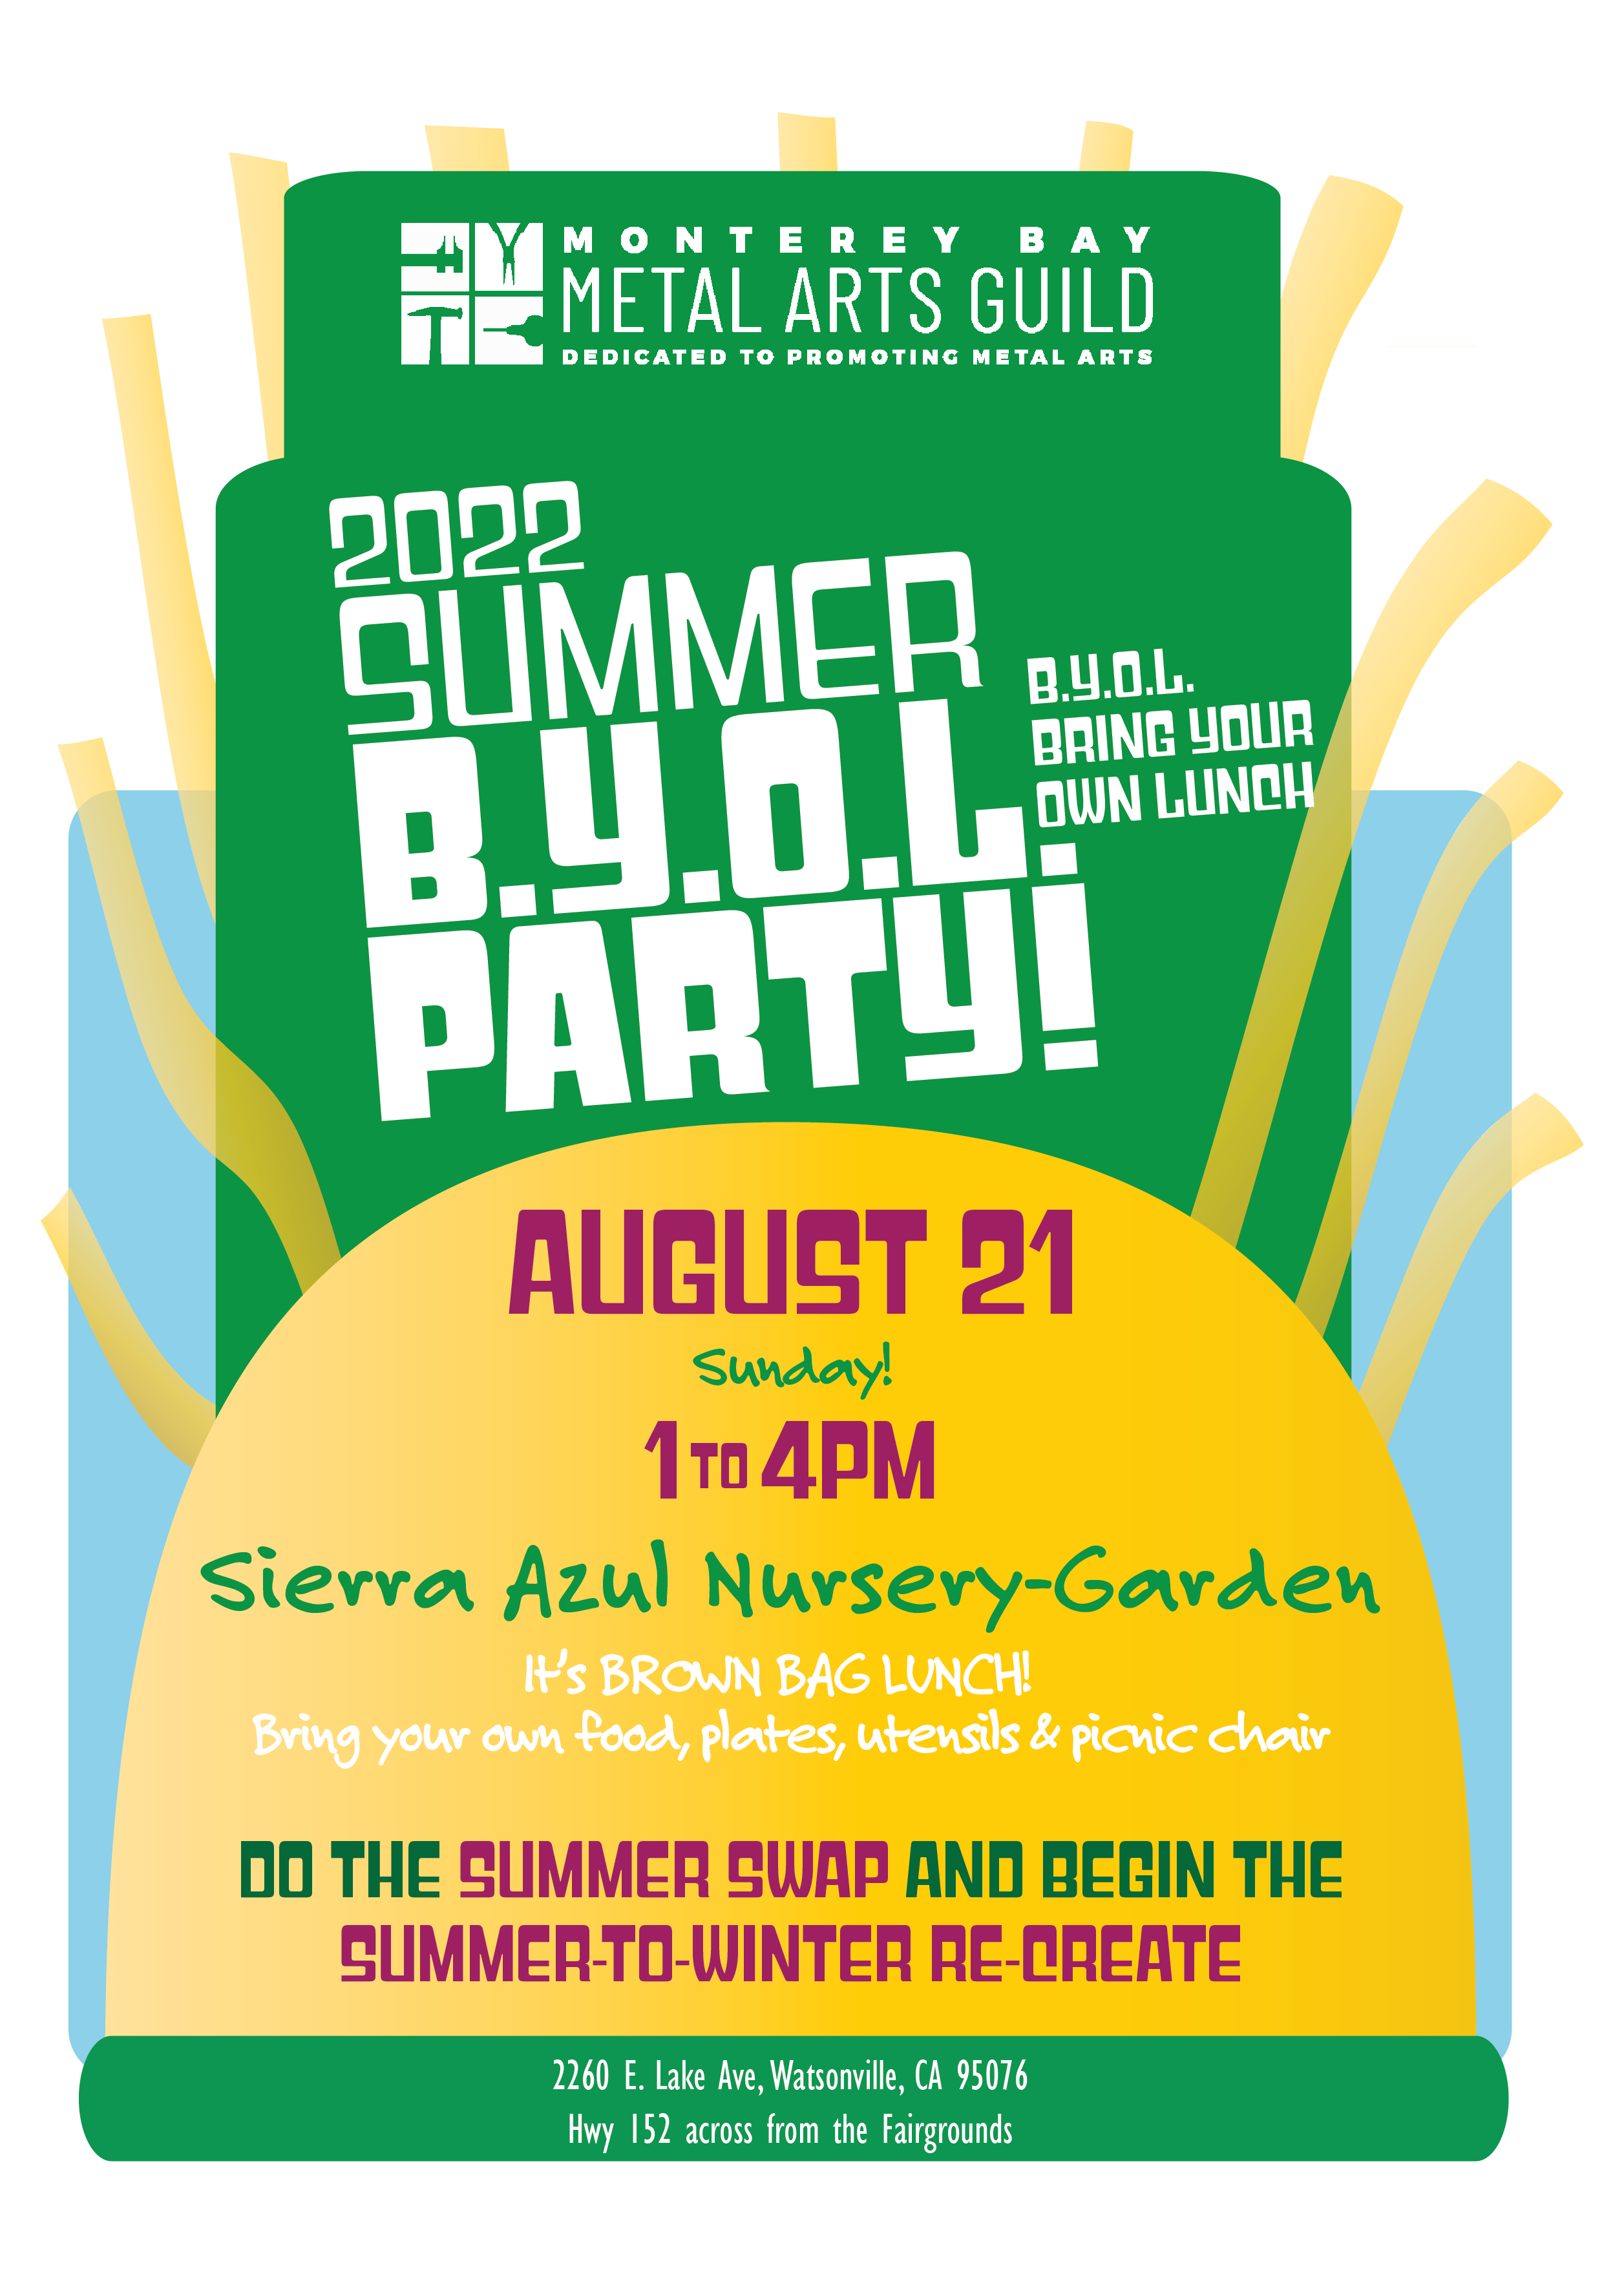 Summer Party Sunday August 21, 2022